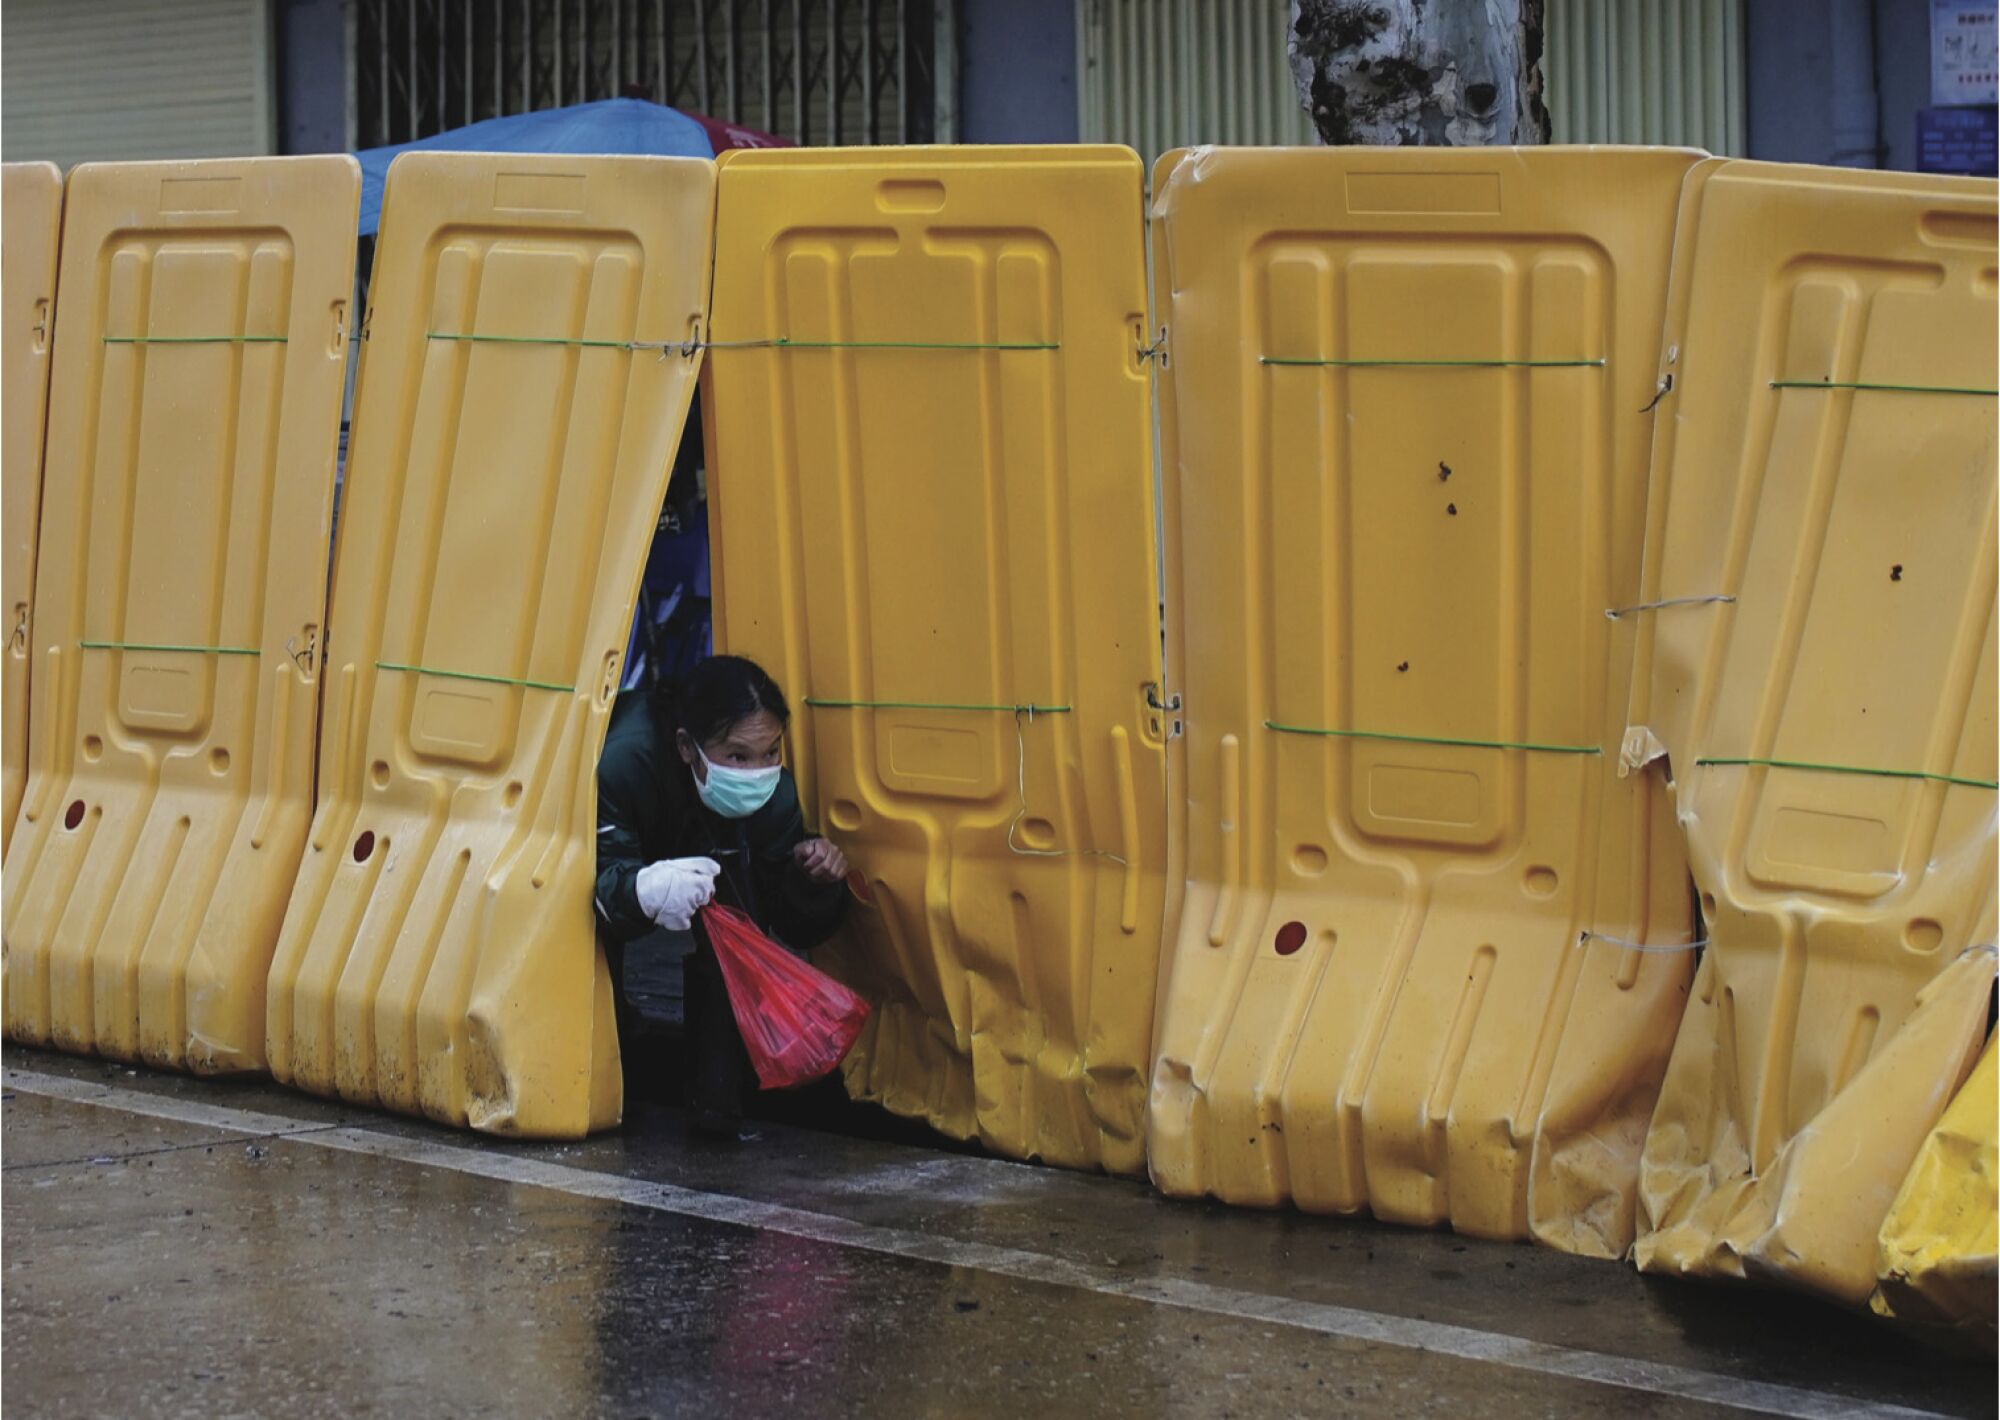 A woman wearing a face mask slips through barriers.